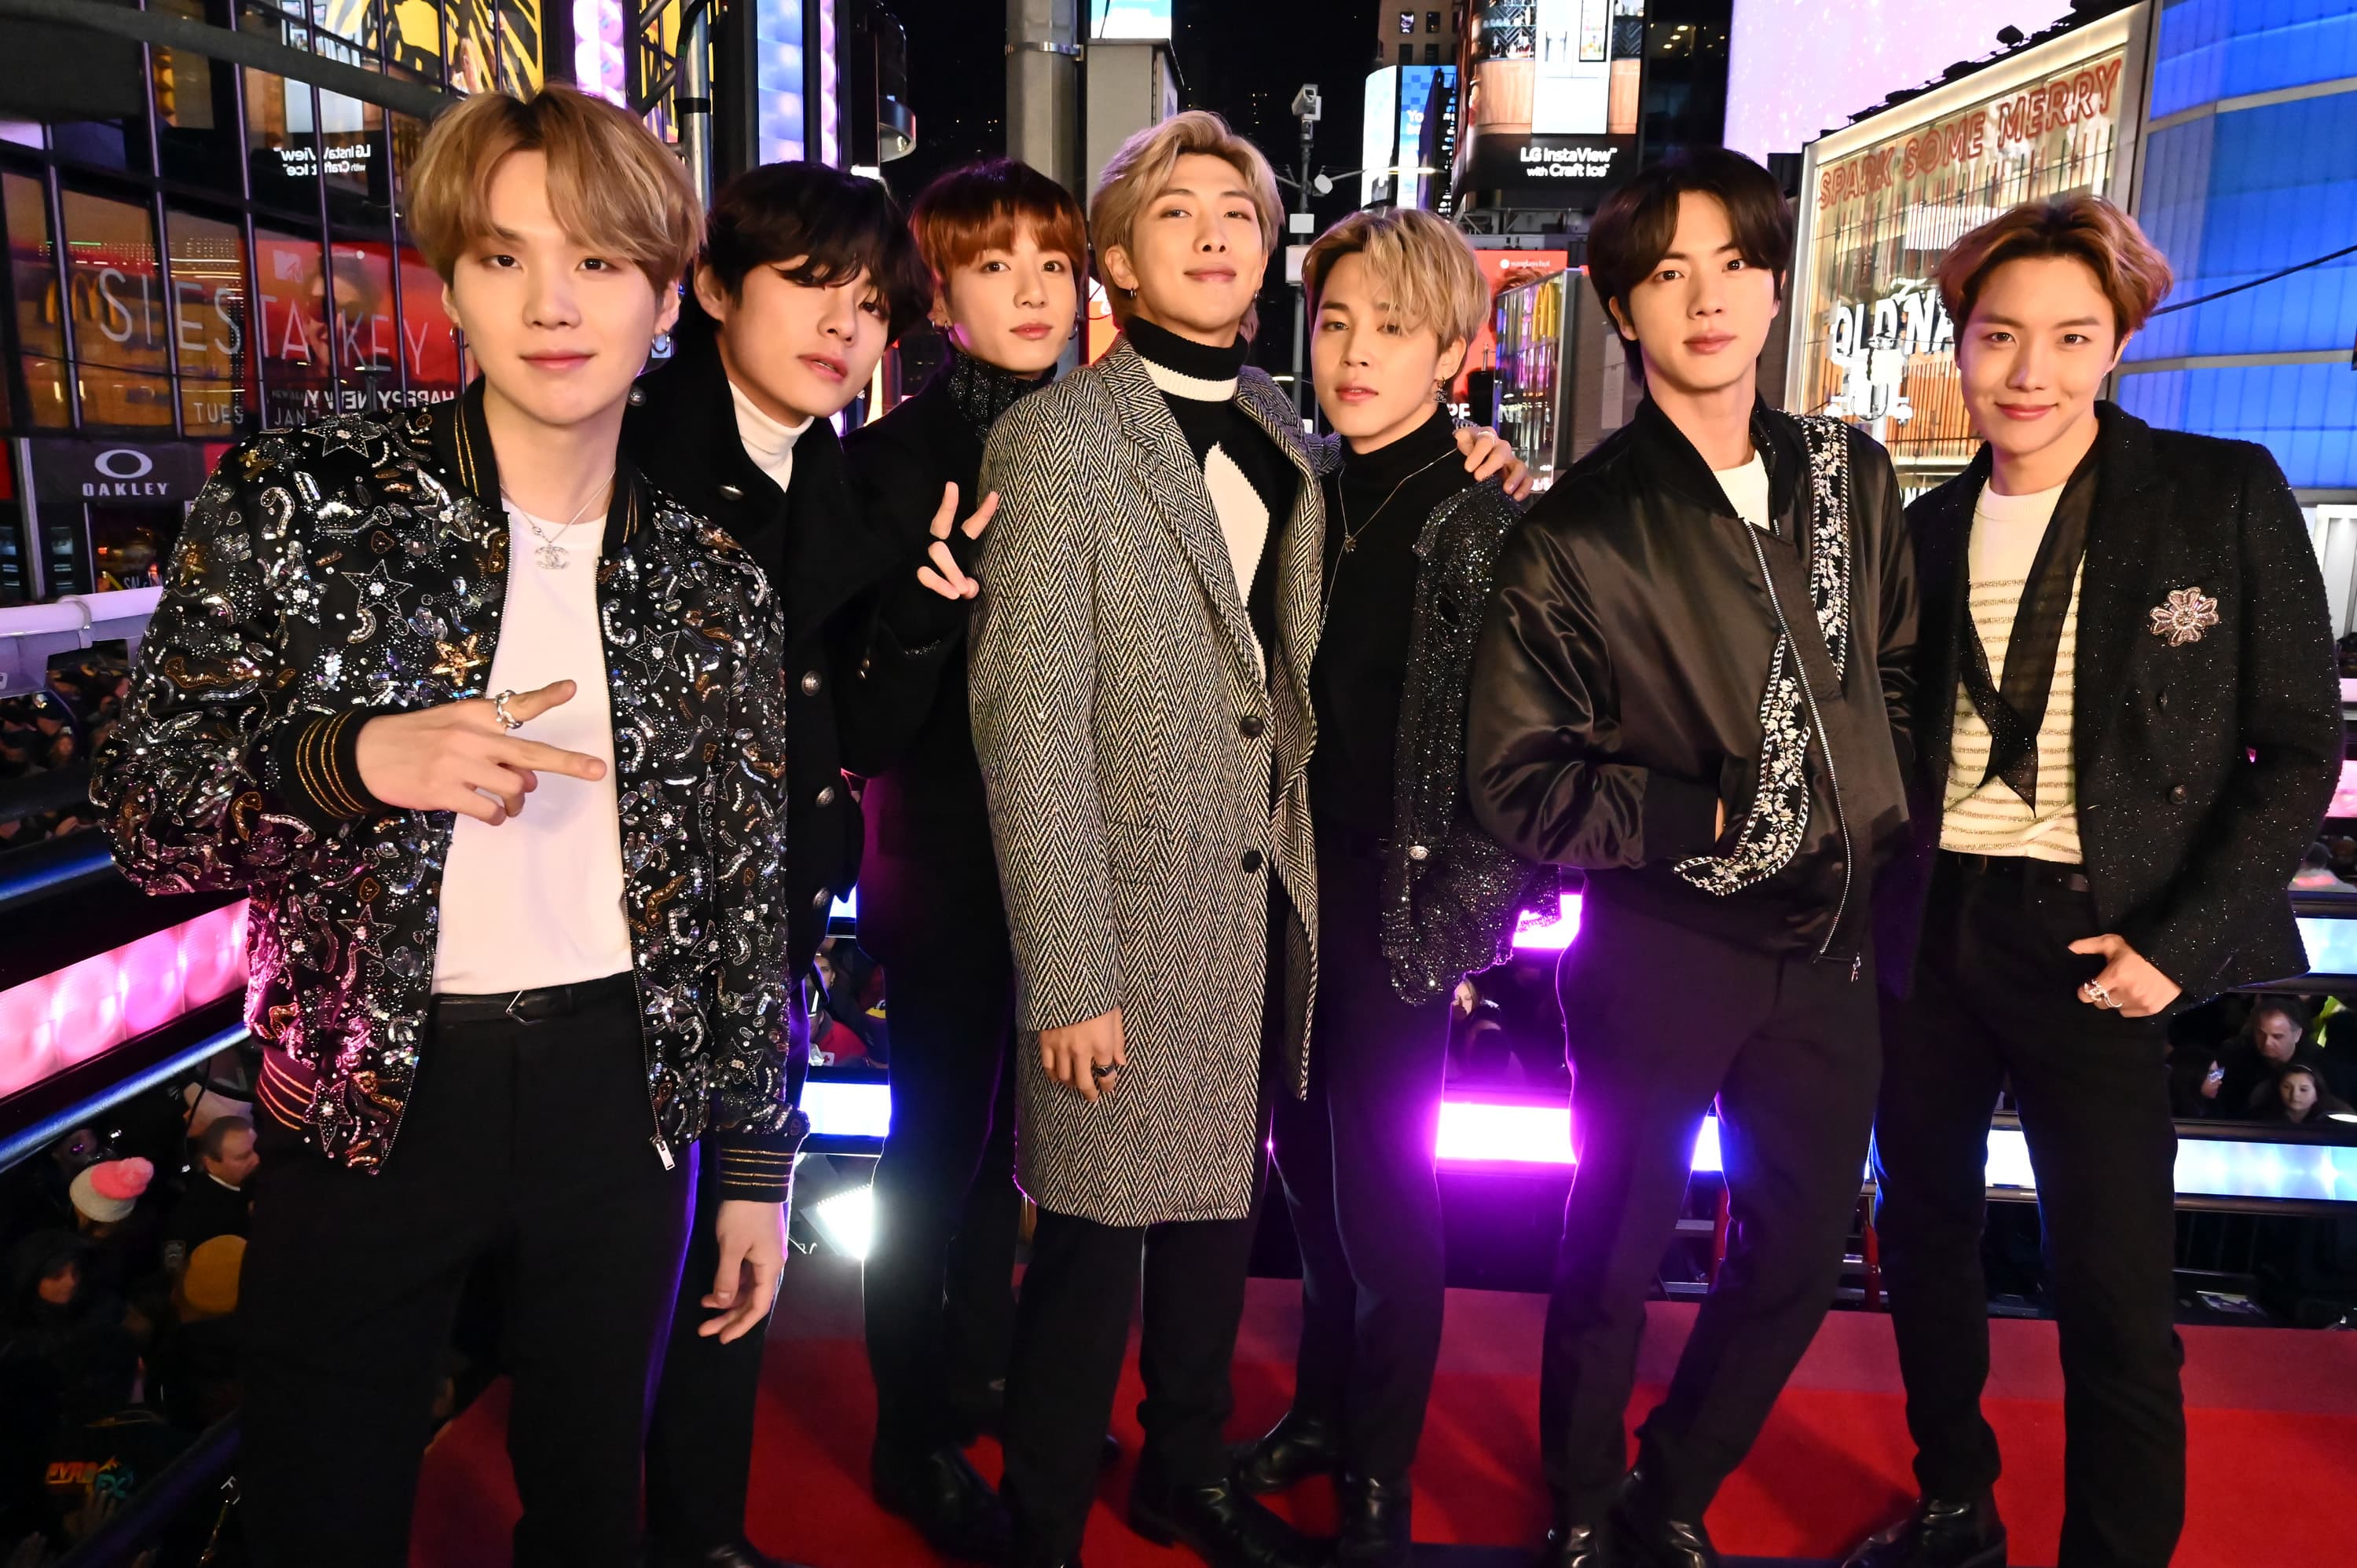 McDonald's teams up with BTS to spotlight the K-pop band's favorite order